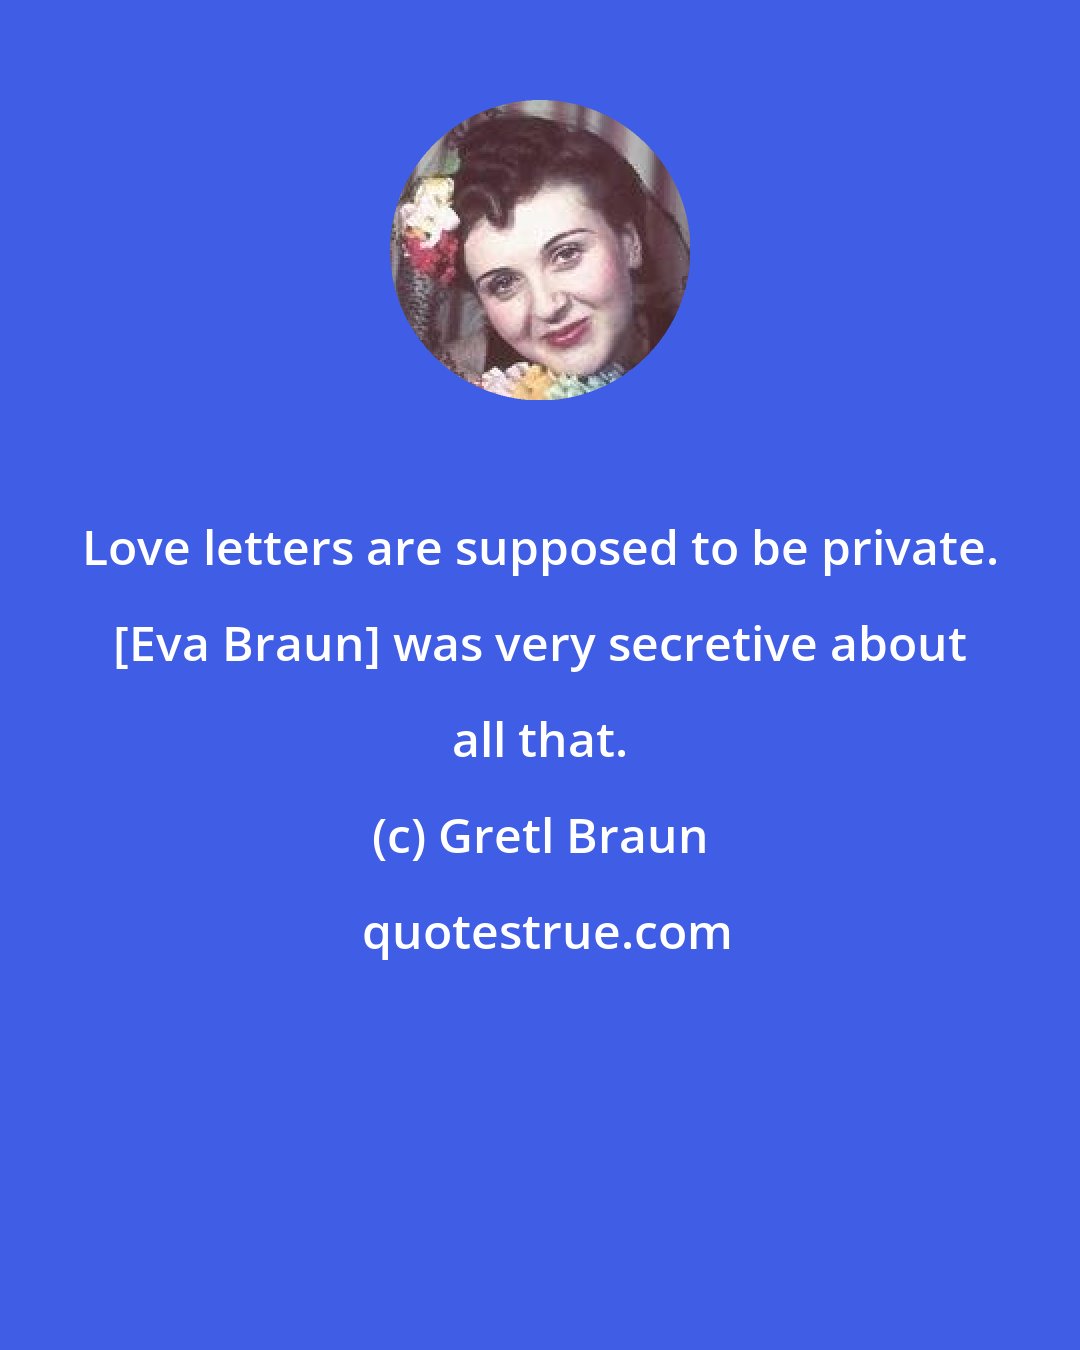 Gretl Braun: Love letters are supposed to be private. [Eva Braun] was very secretive about all that.